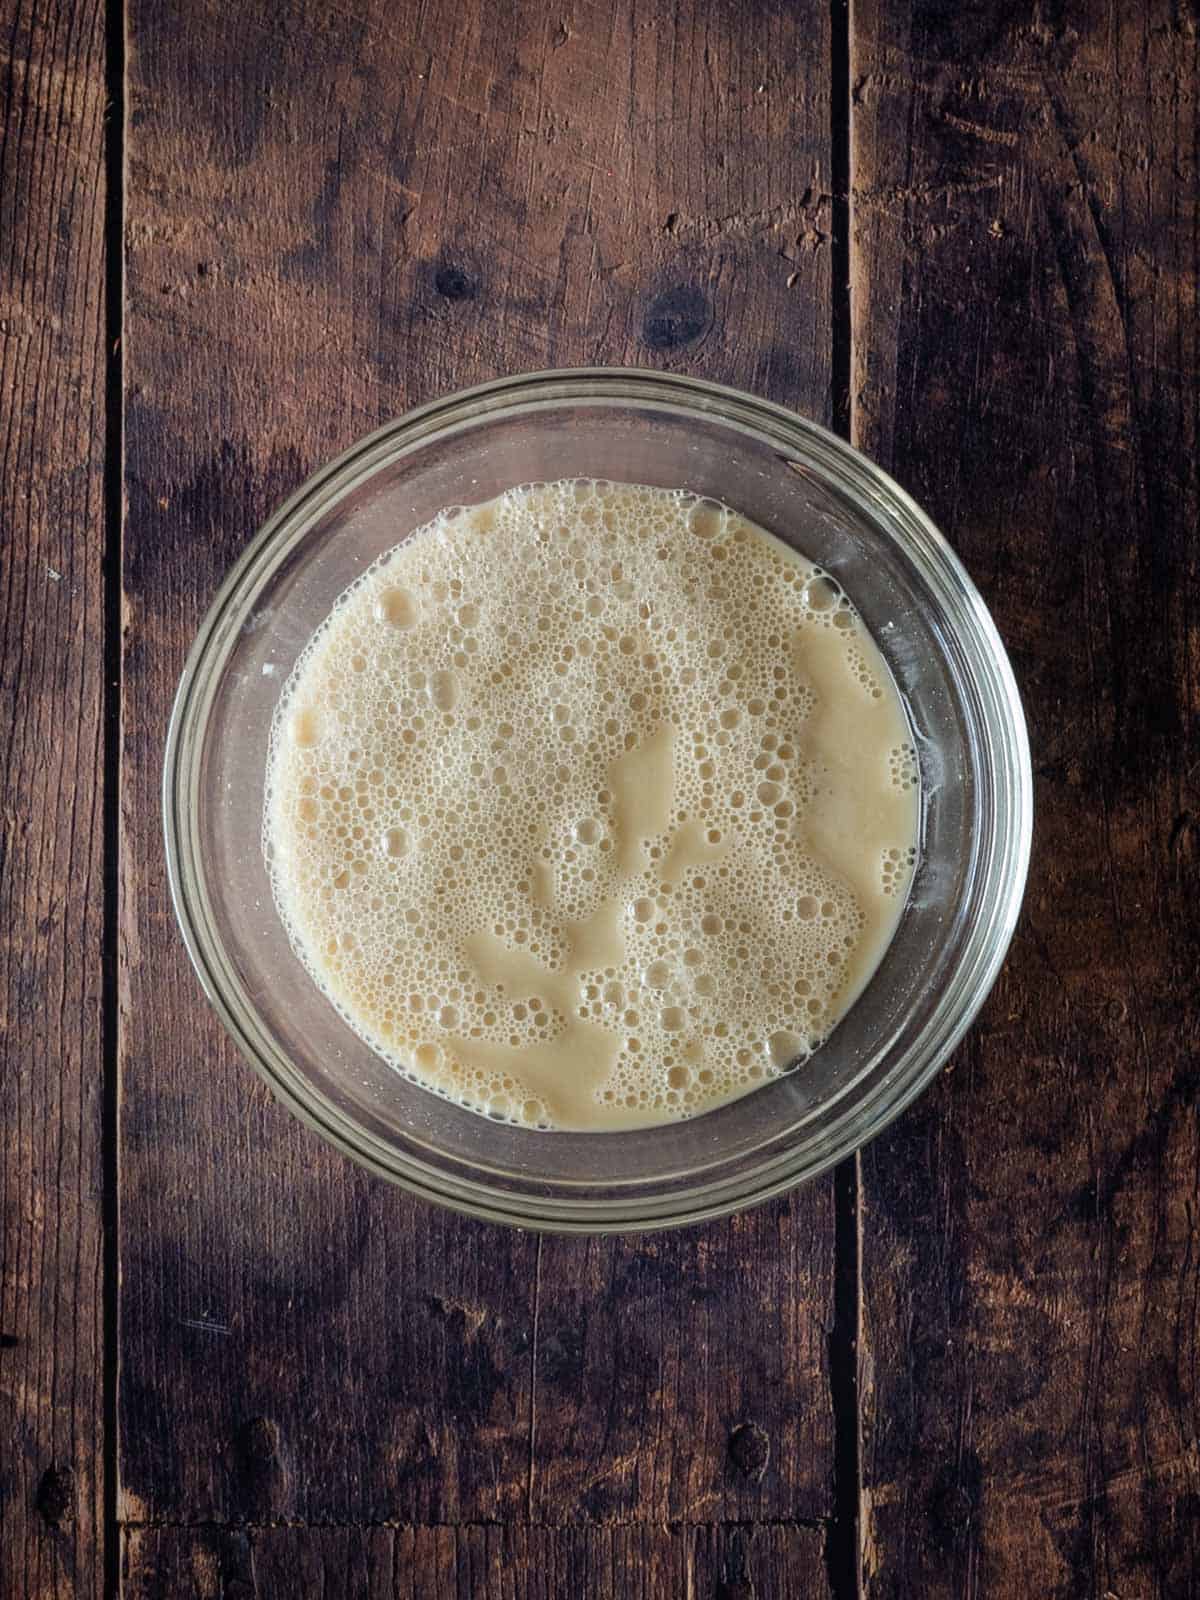 let the yeast sit with the sugar and water for five minutes